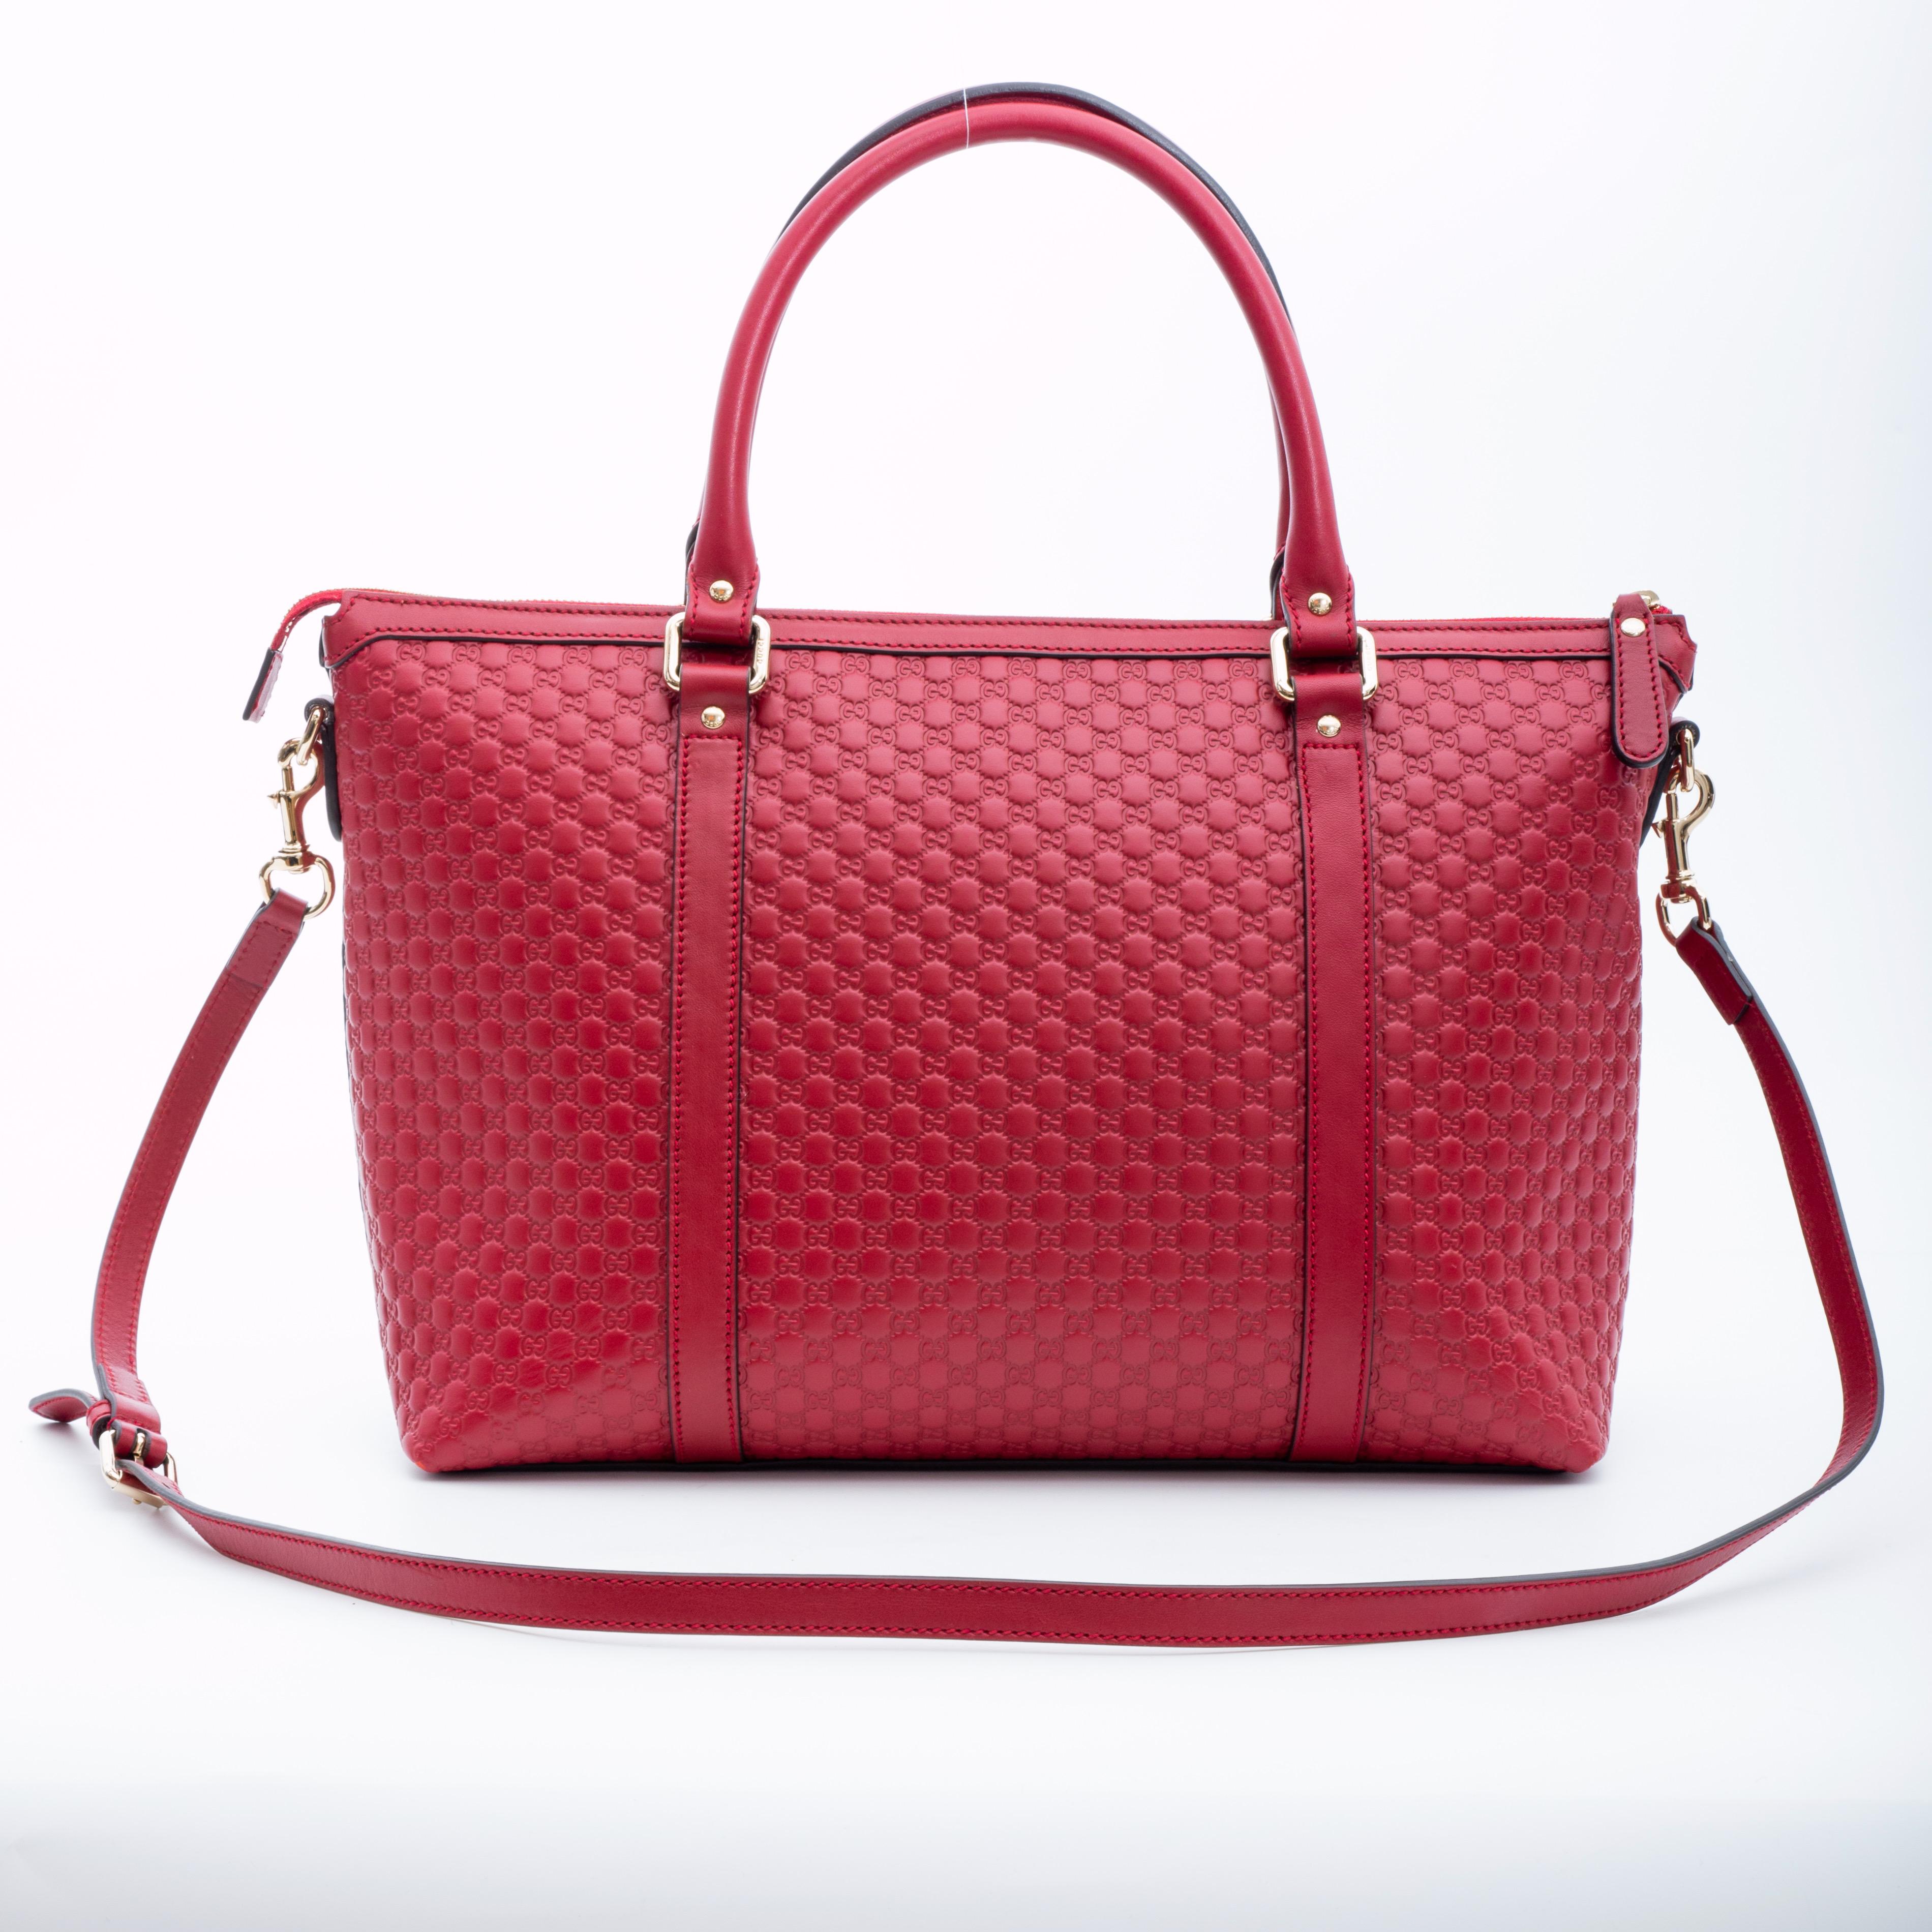 This tote is made of embossed microguccissima leather in red. The bag features dual rolled leather top handles, an optional shoulder strap, light gold hardware, top zip closure and a beige fabric interior with a patch pocket.

COLOR: Red
MATERIAL: